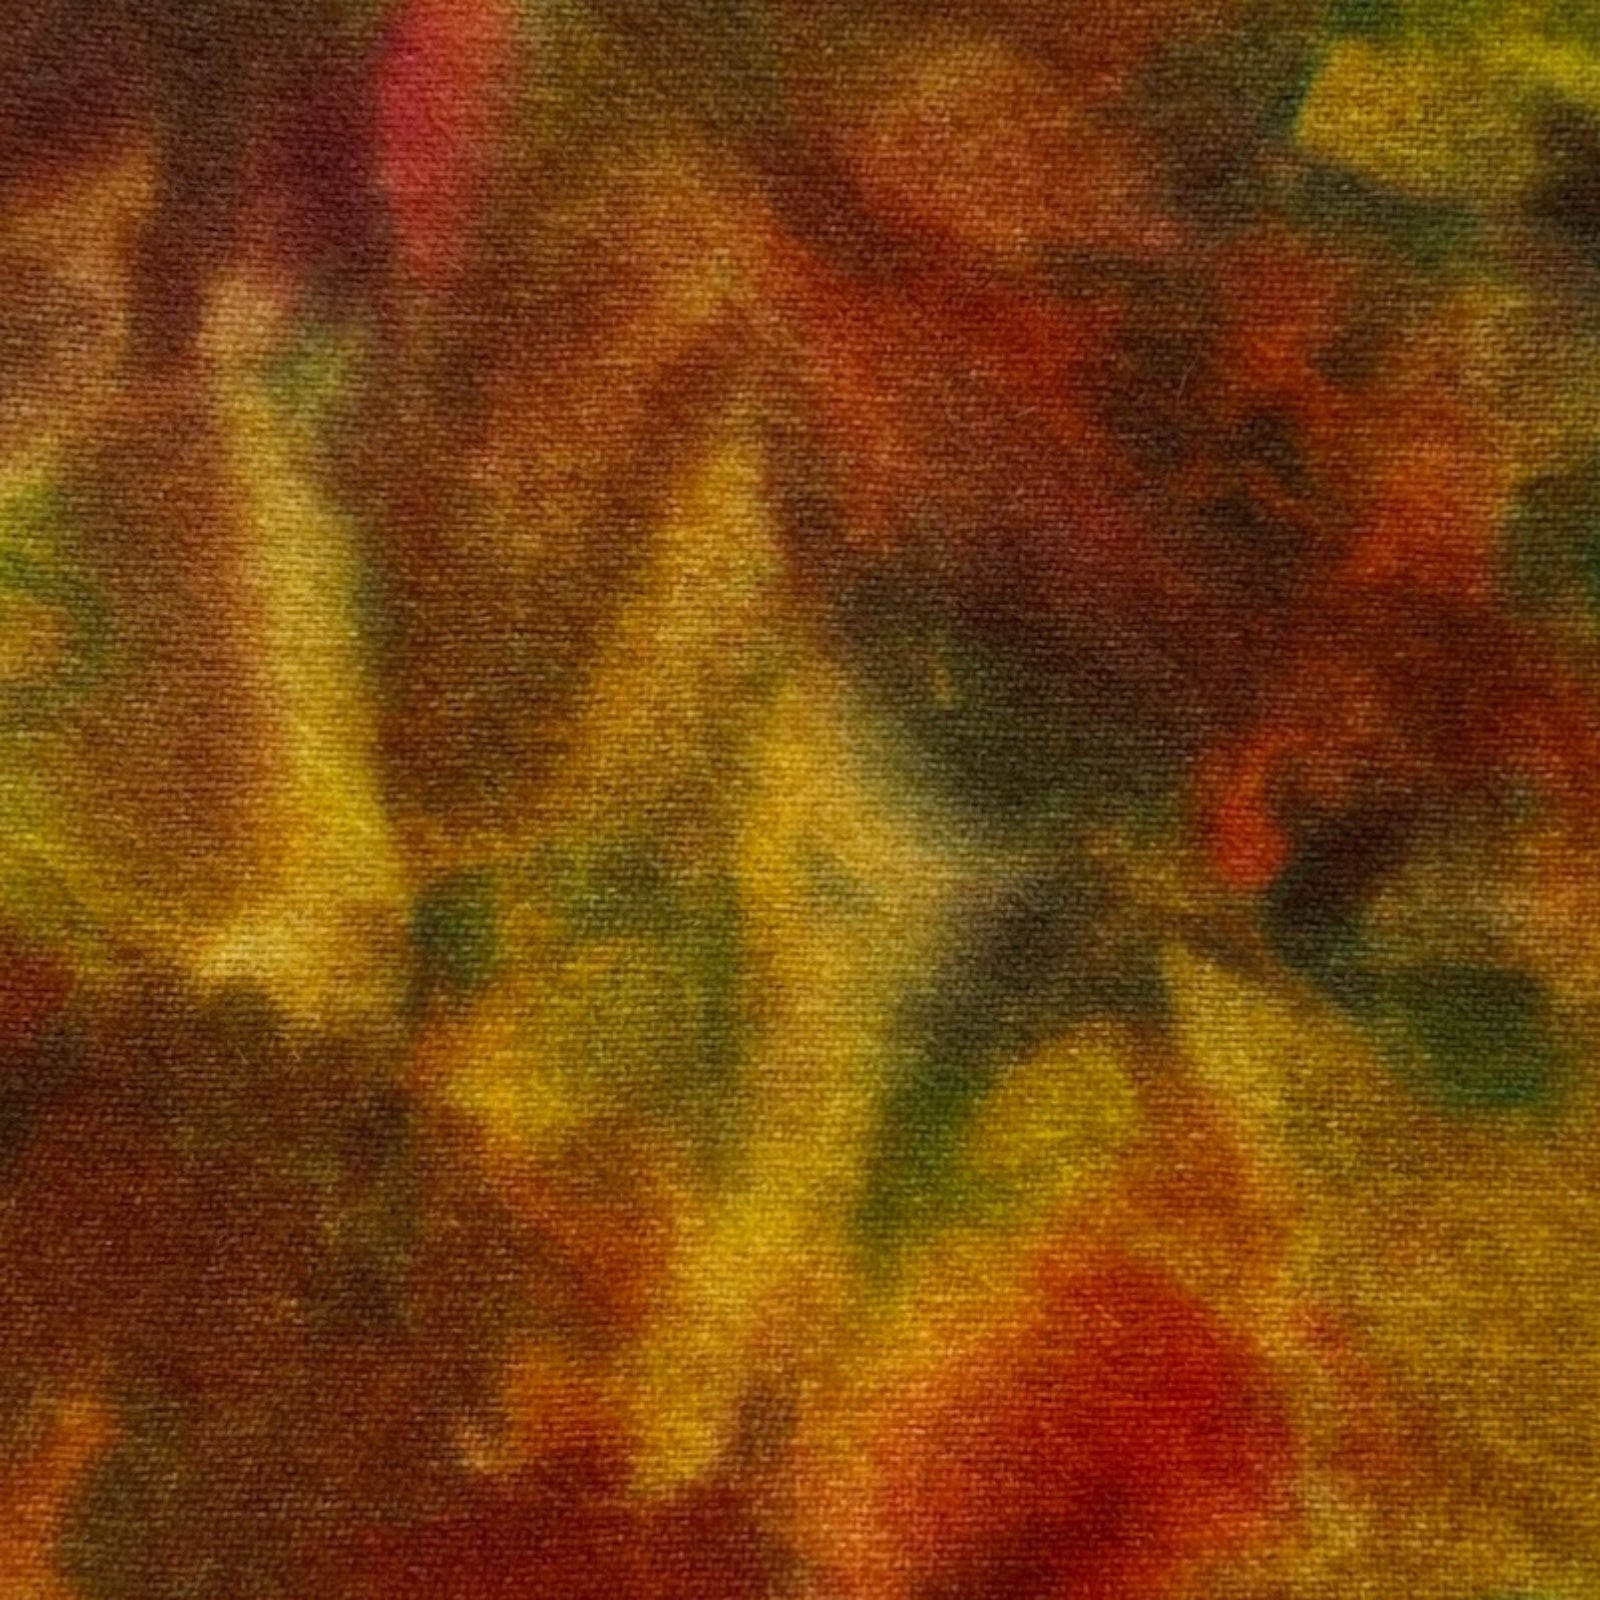 Clown - Colorama Hand Dyed Wool - Offered by HoneyBee Hive Rug Hooking